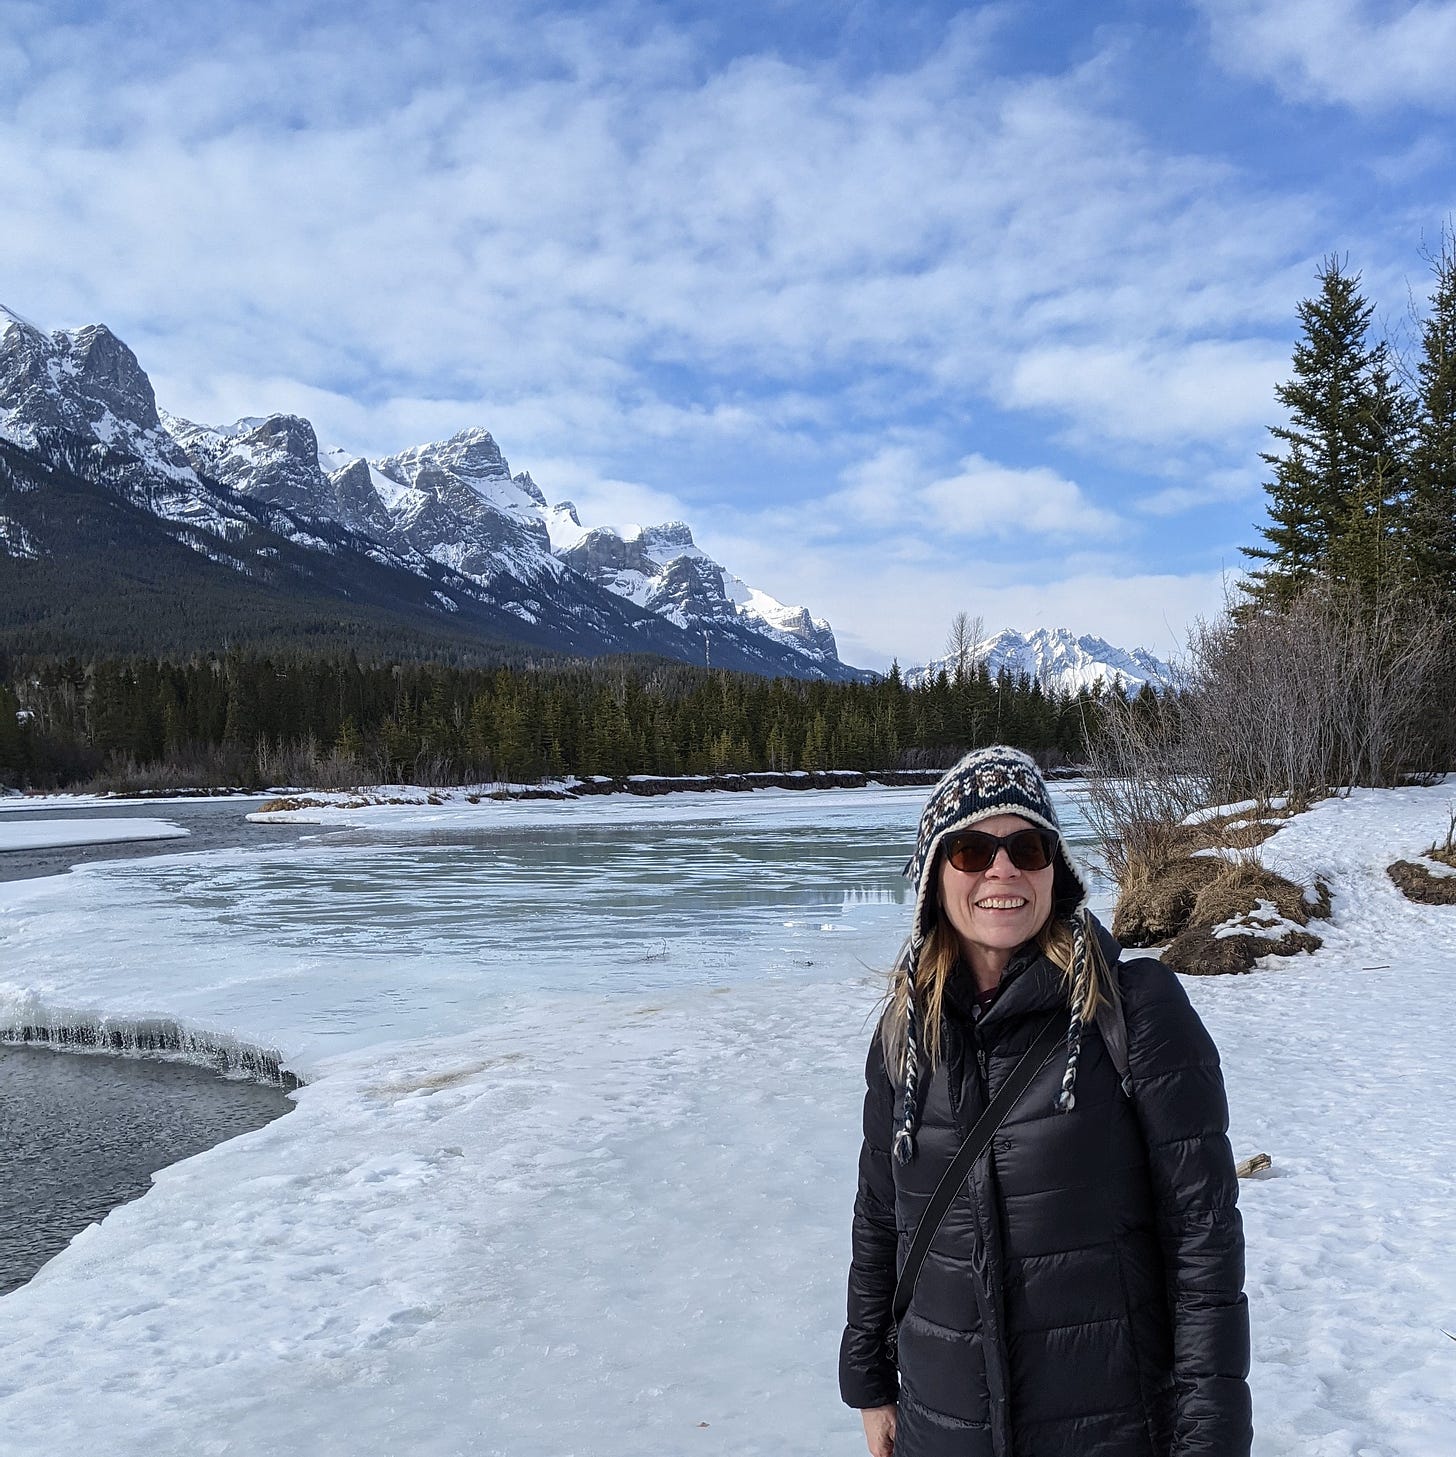 Susan Moore hiking along the Bow River in Canmore Alberta in winter.